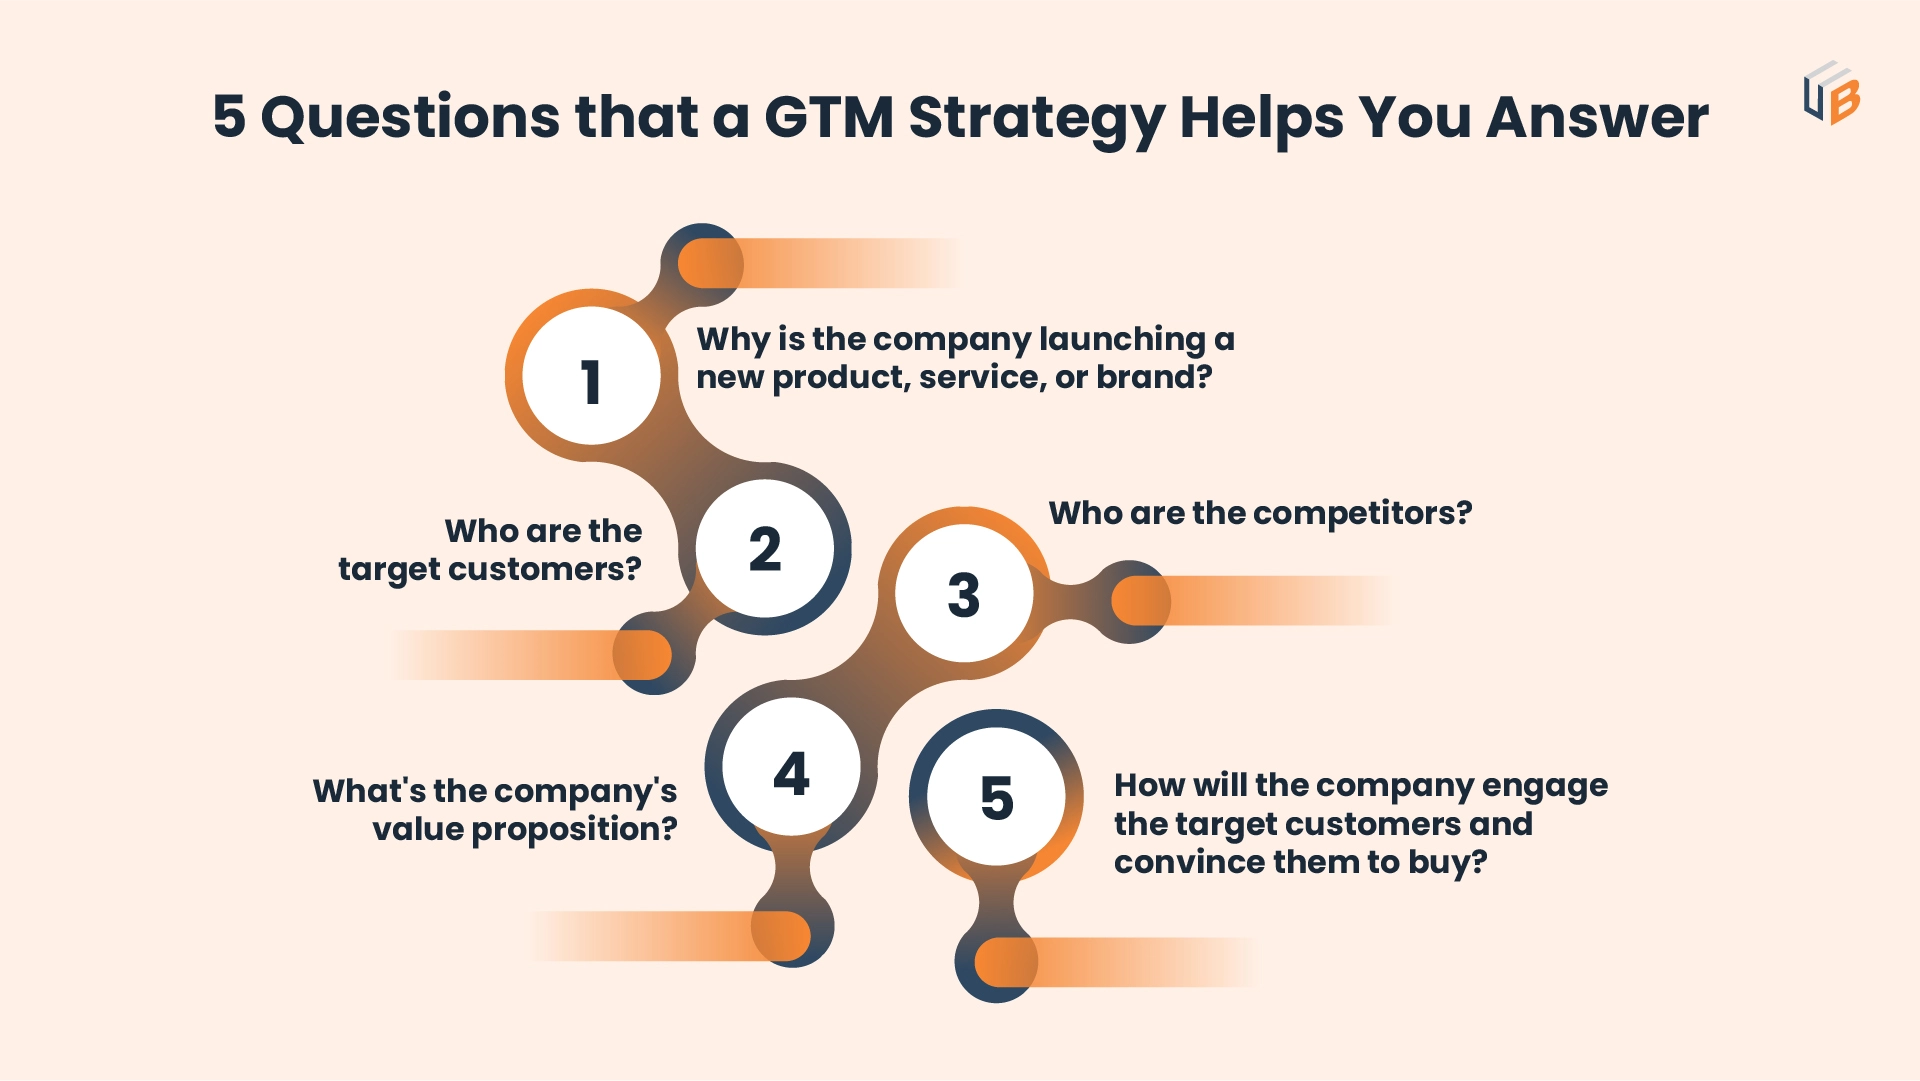 5 Questions that a GTM Strategy helps you answer